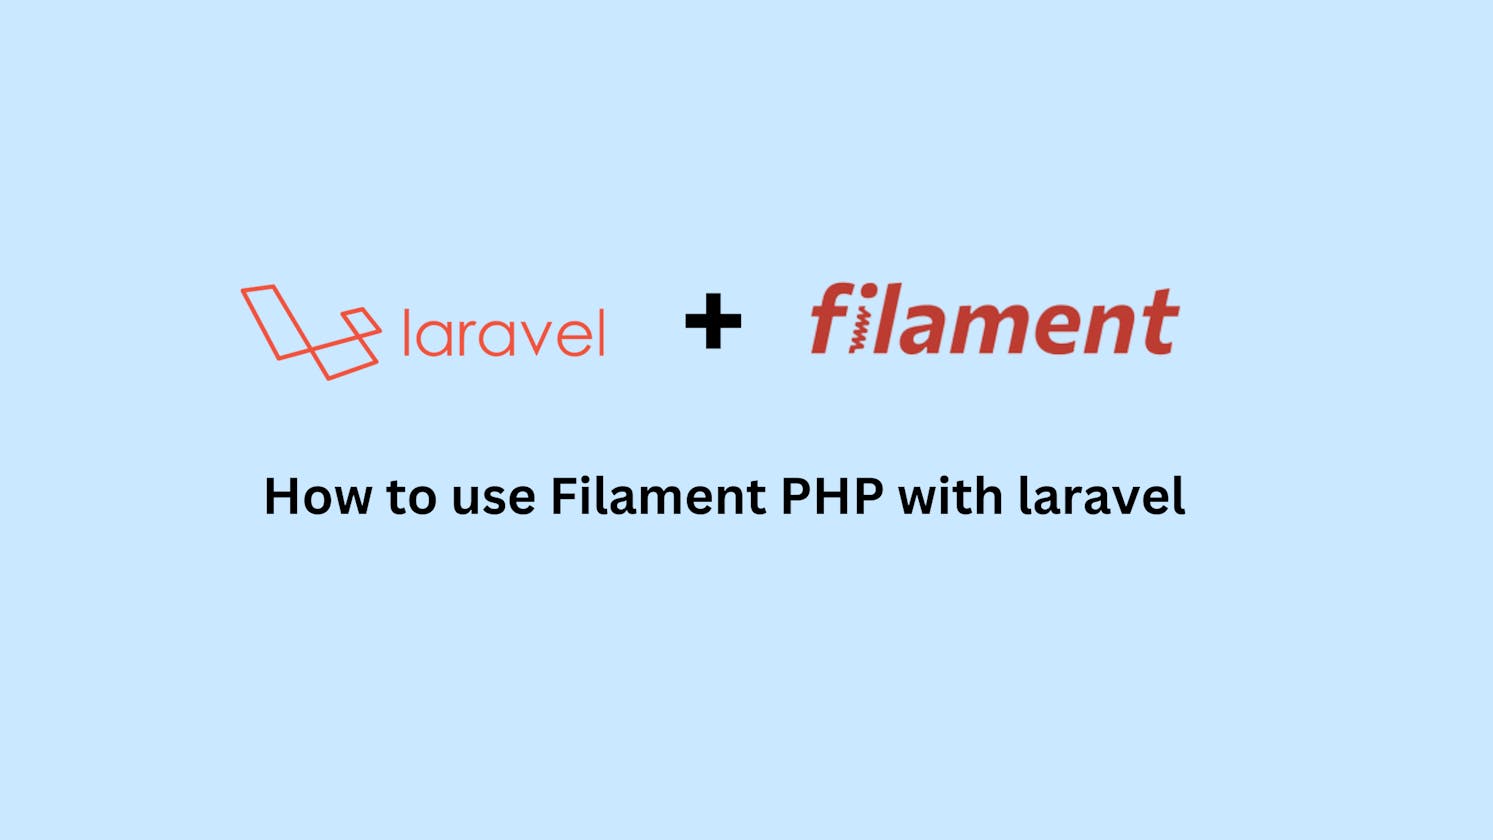 How to use Filament PHP with laravel